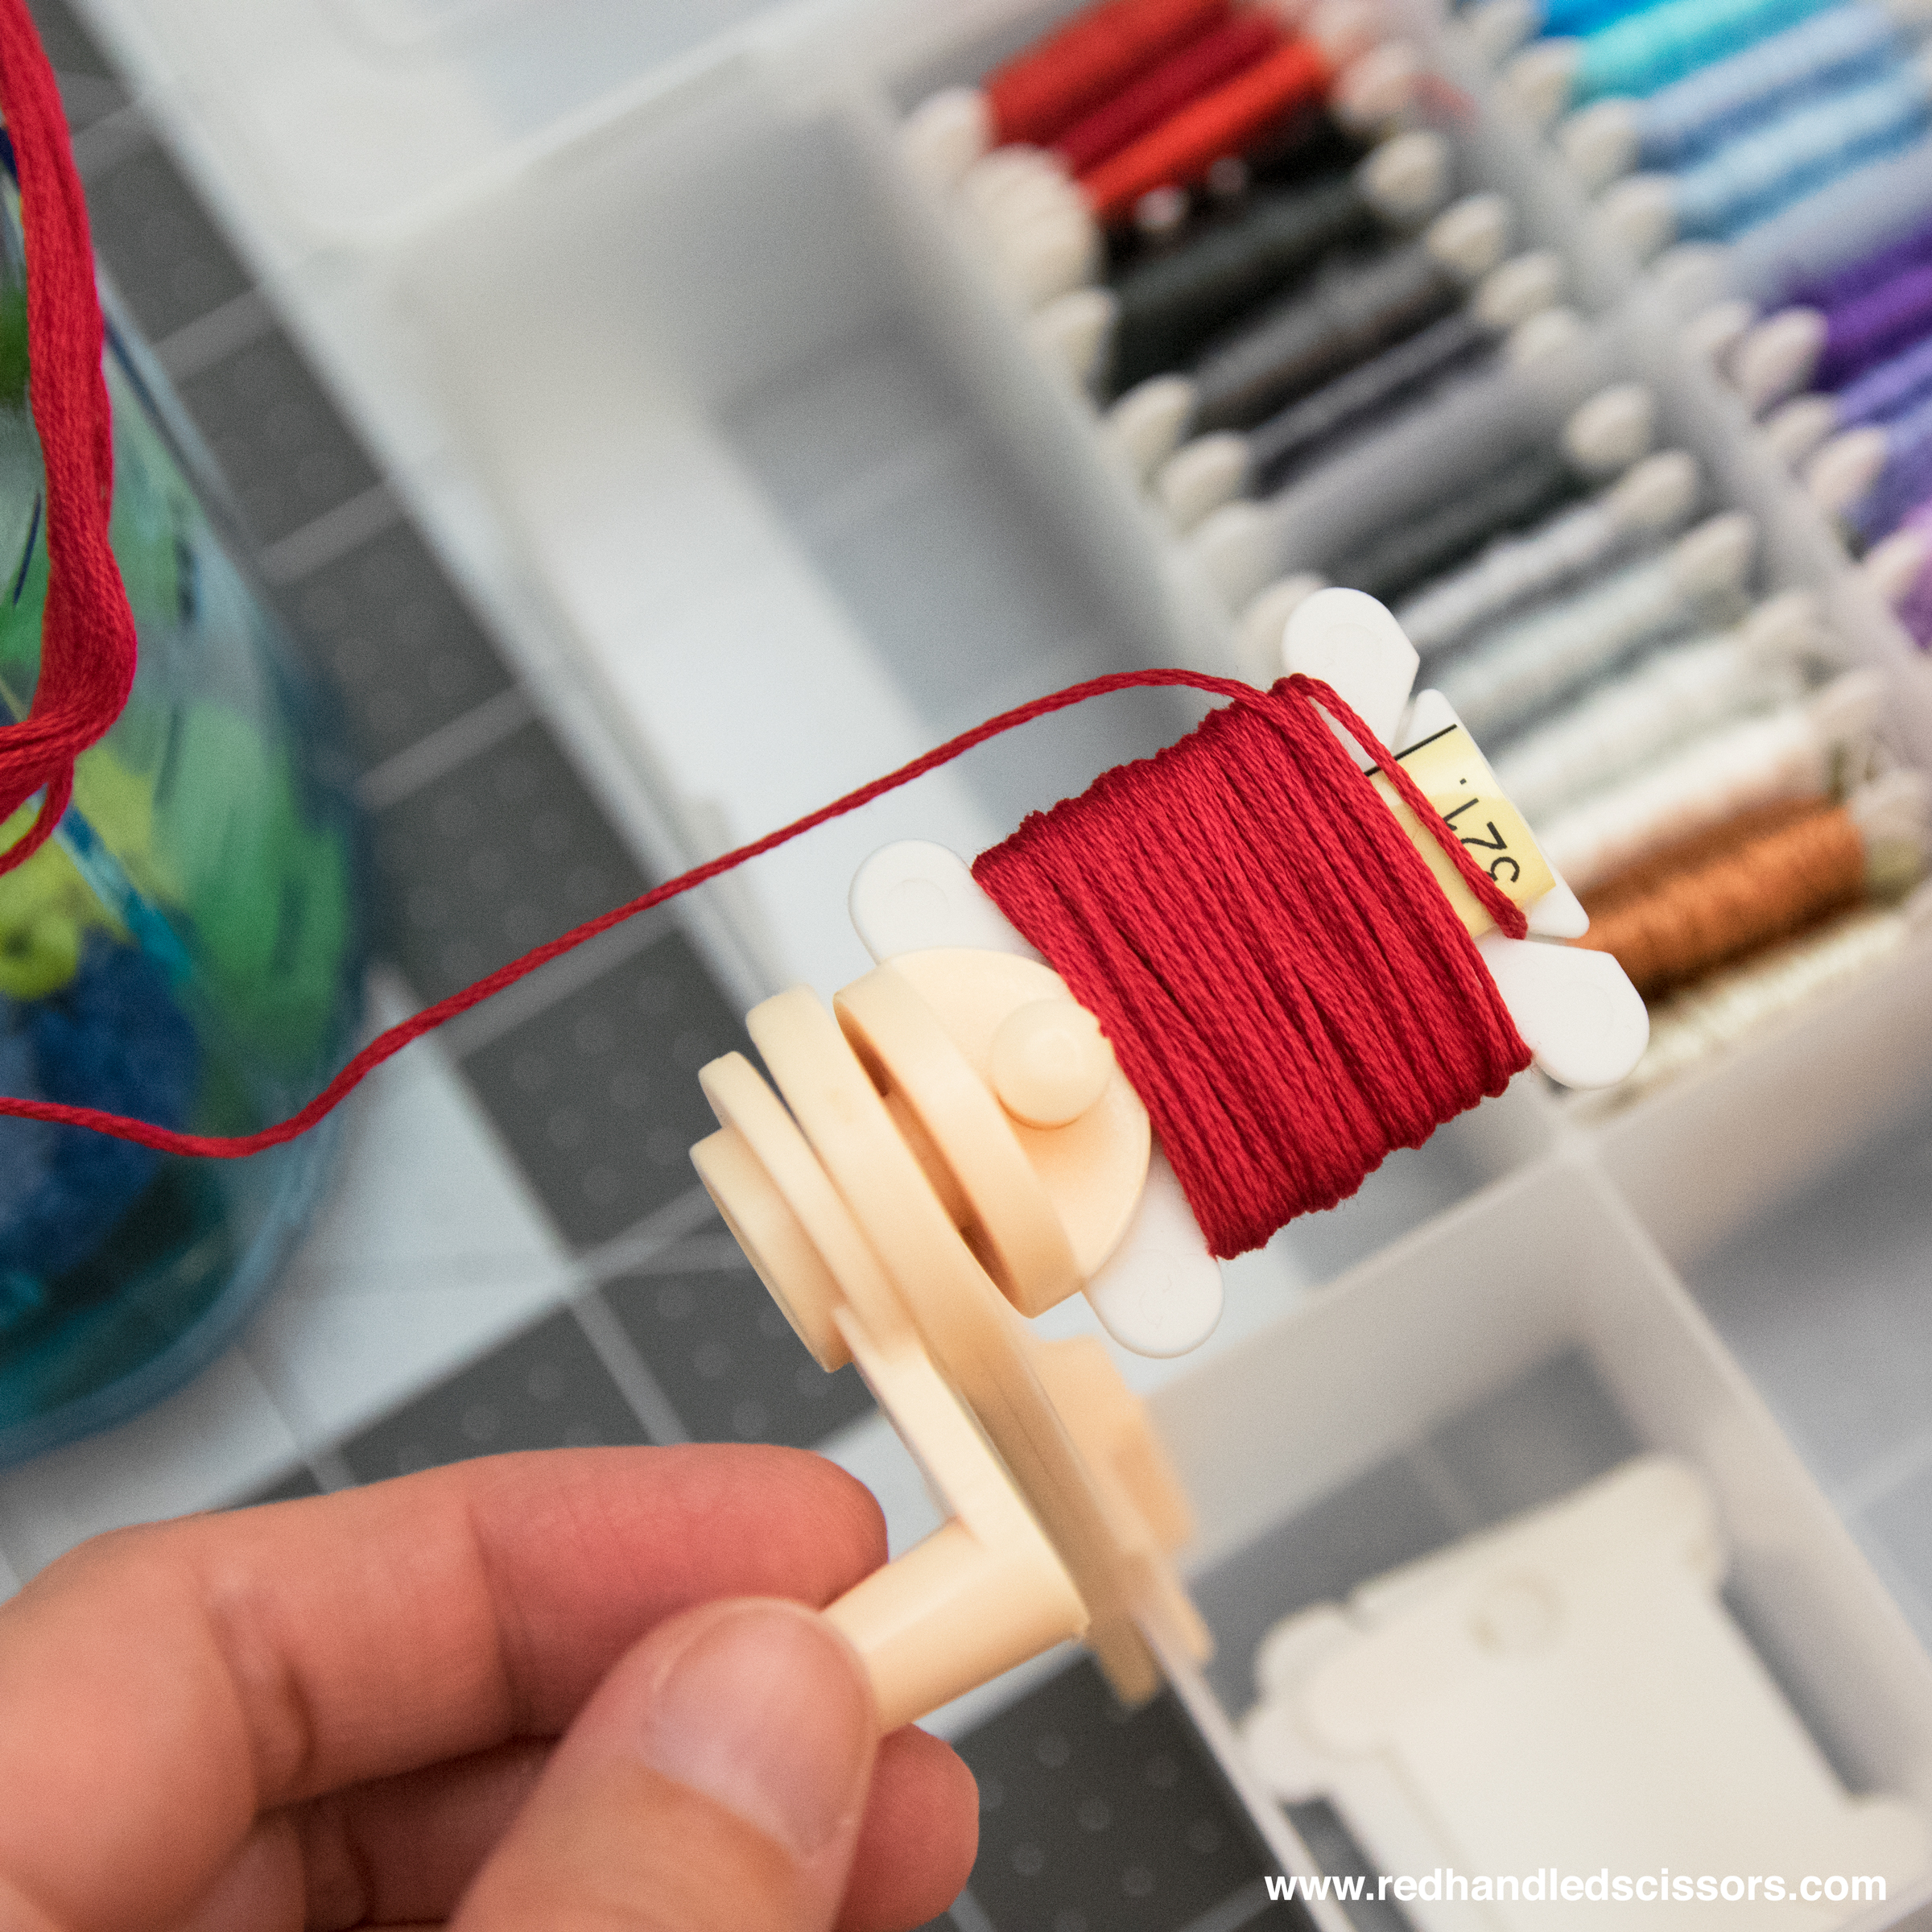 How to Organize Embroidery Floss - Creative Cynchronicity